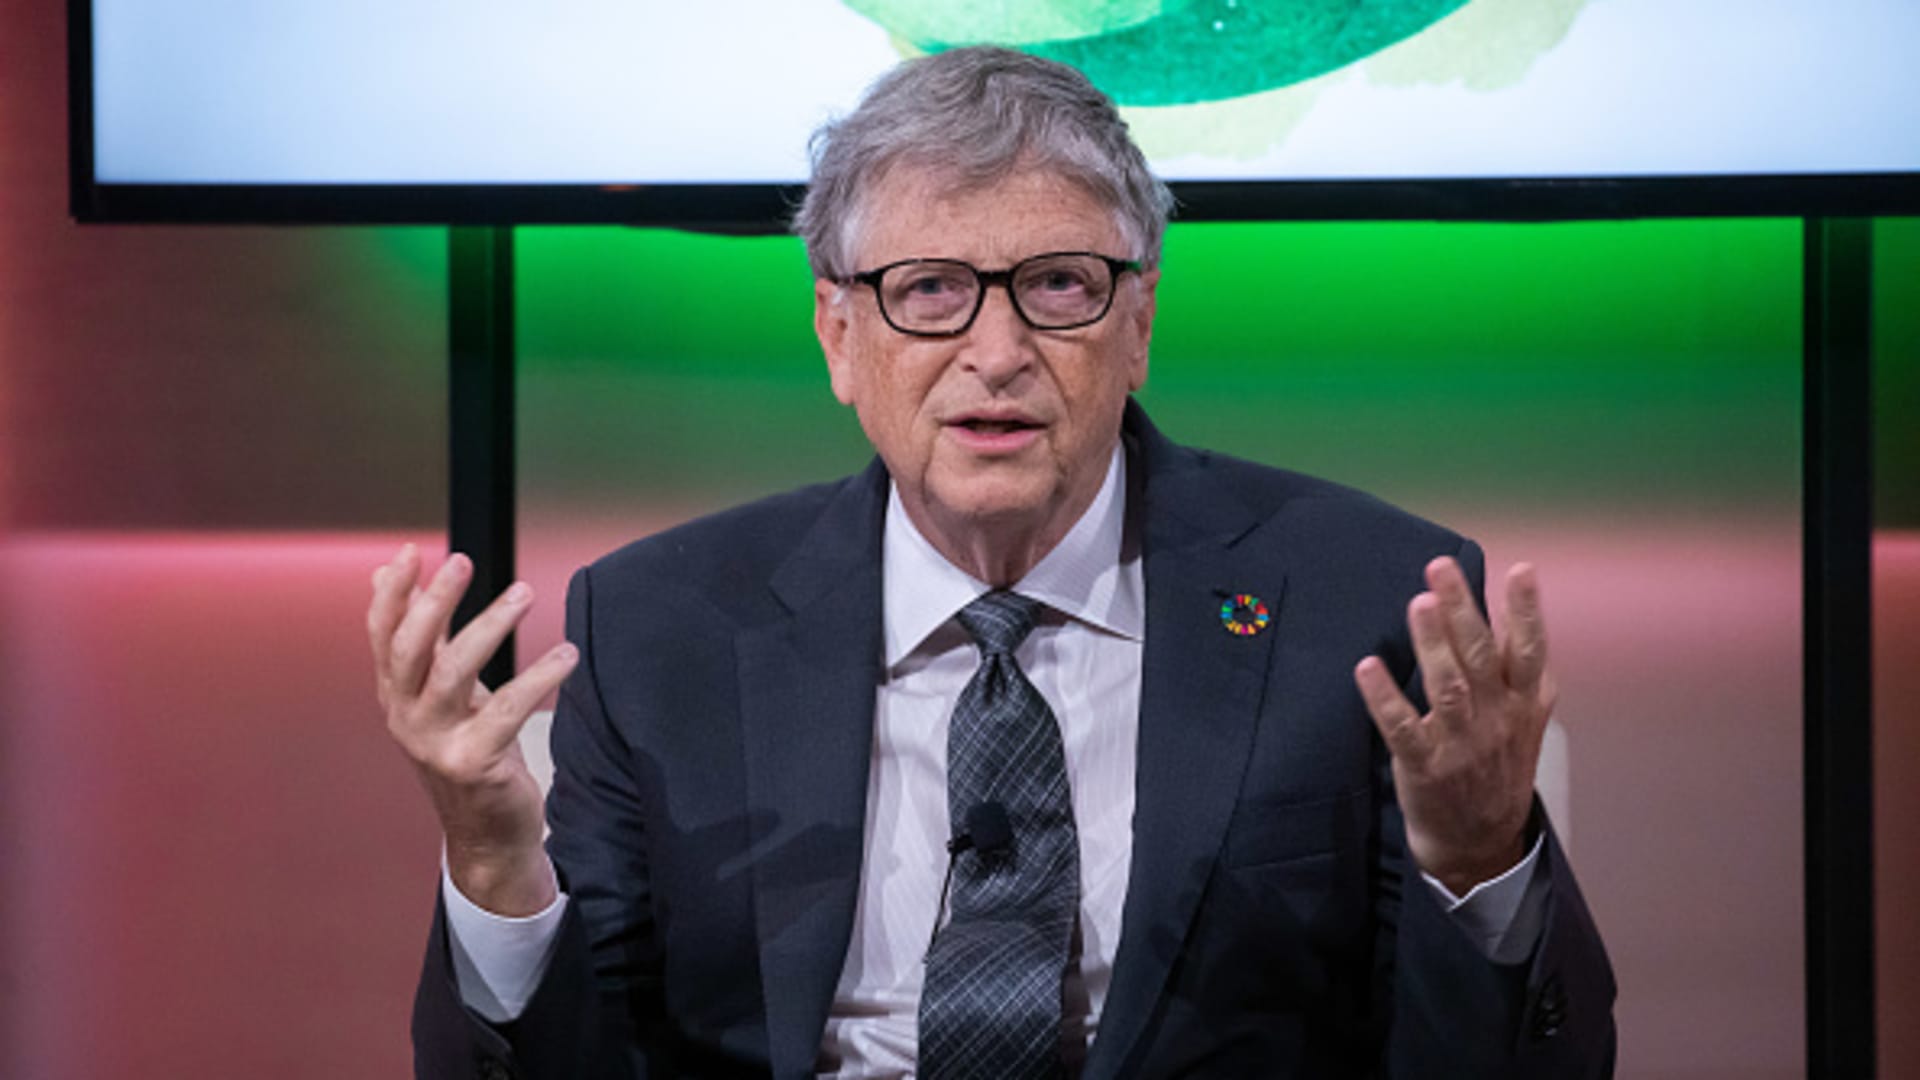 Bill Gates: Nuclear waste is not a reason to avoid nuclear energy